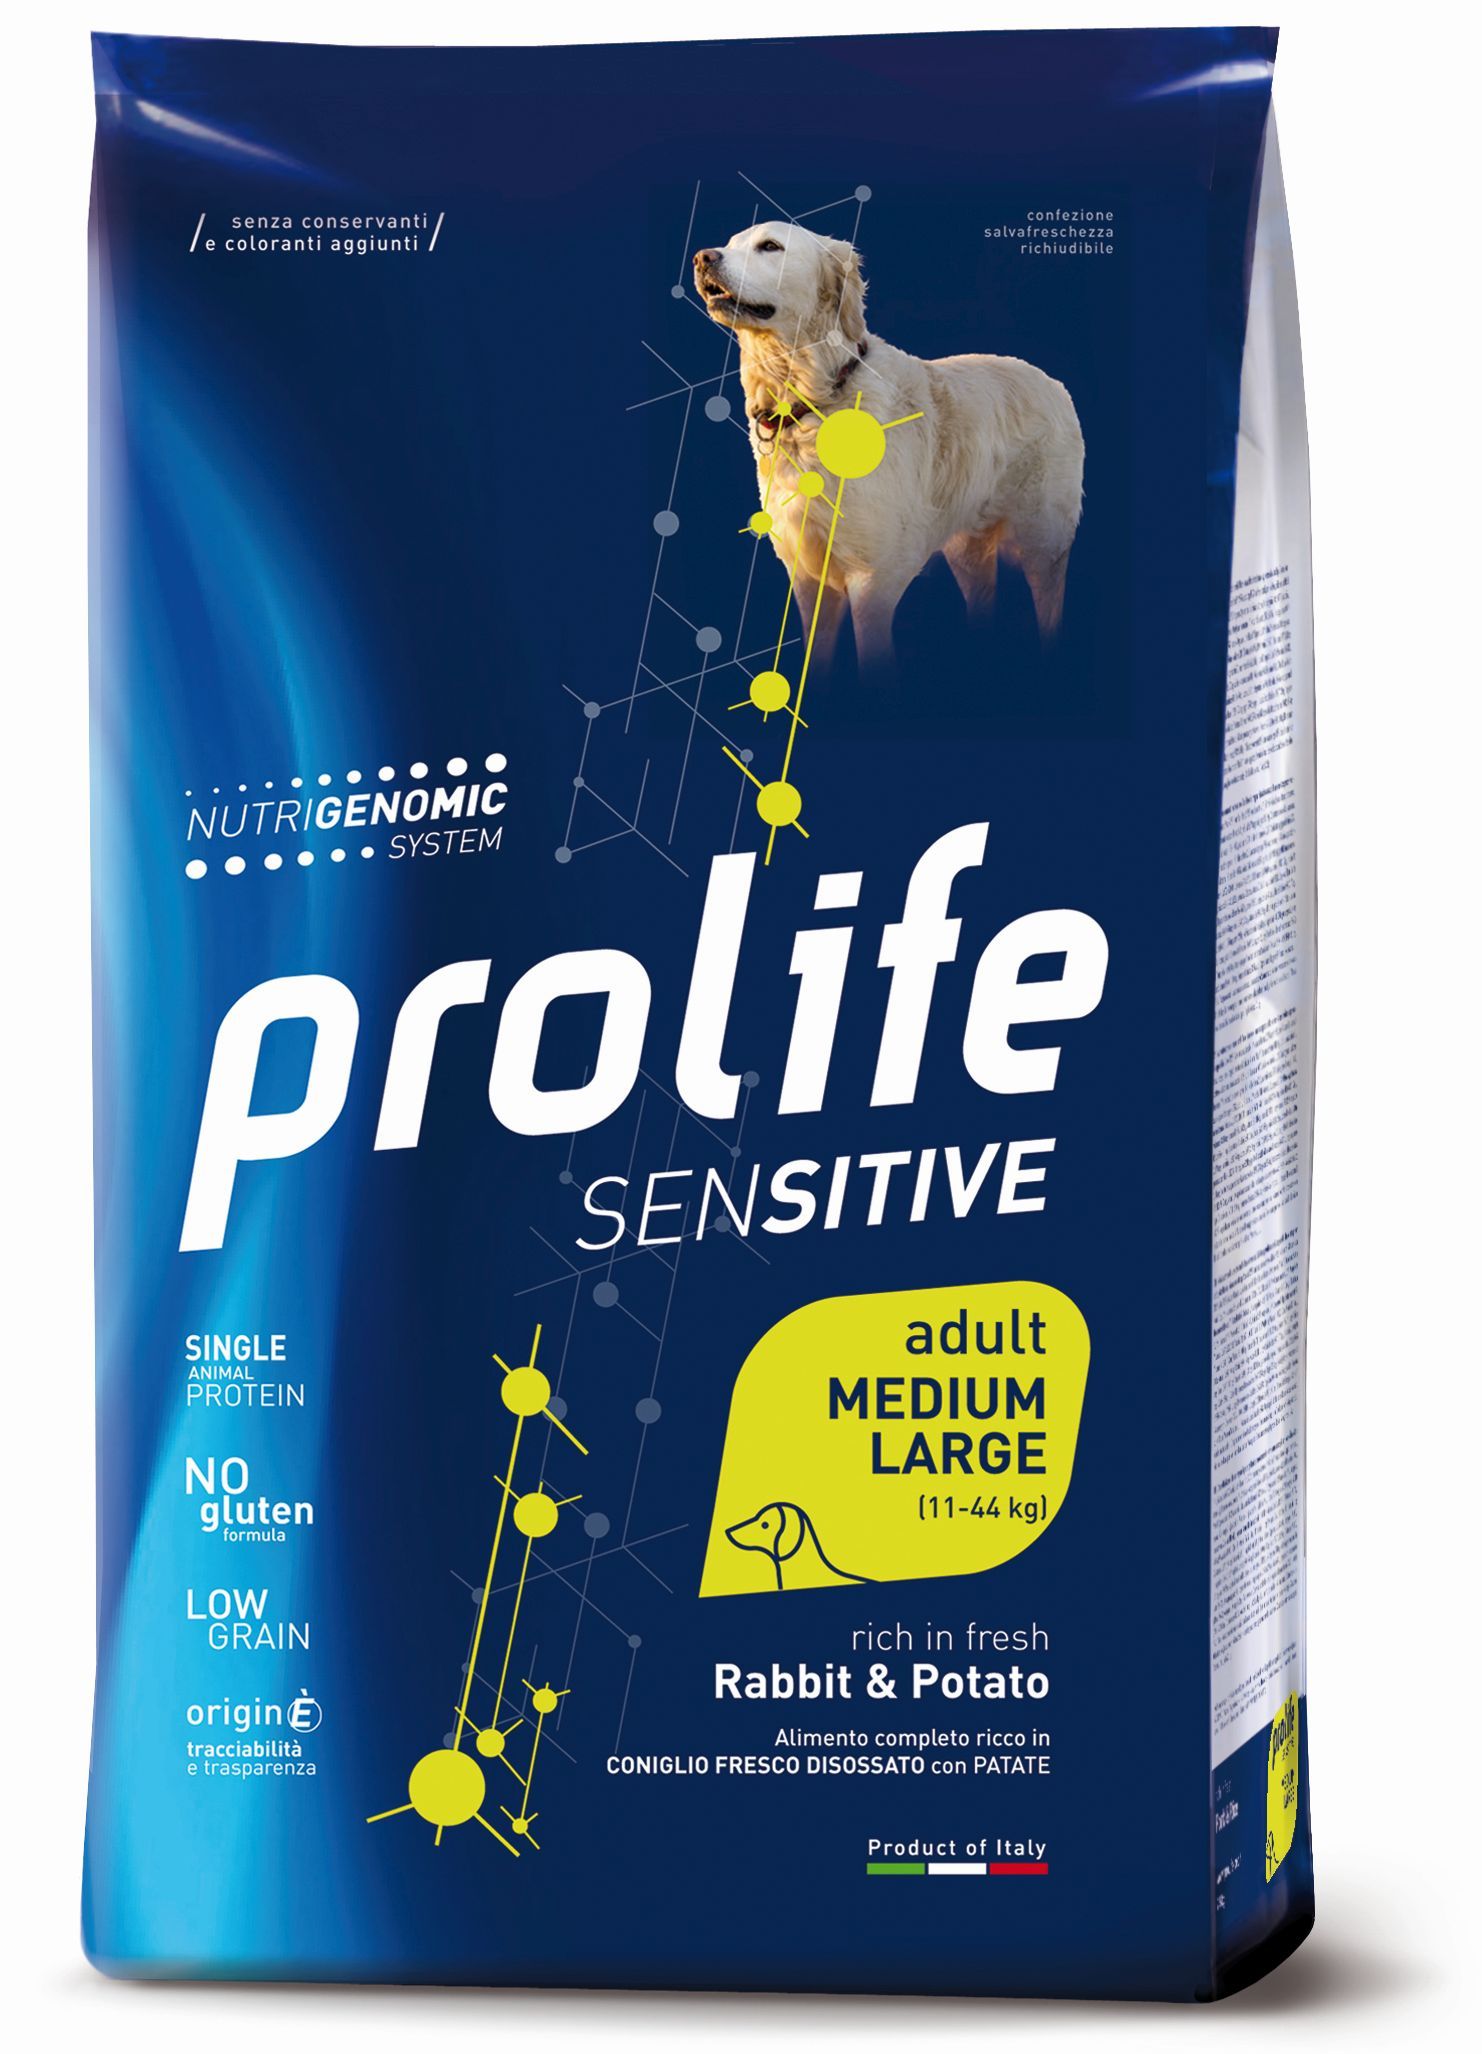 Complete pet food, rich in fresh deboned lamb and rice.
